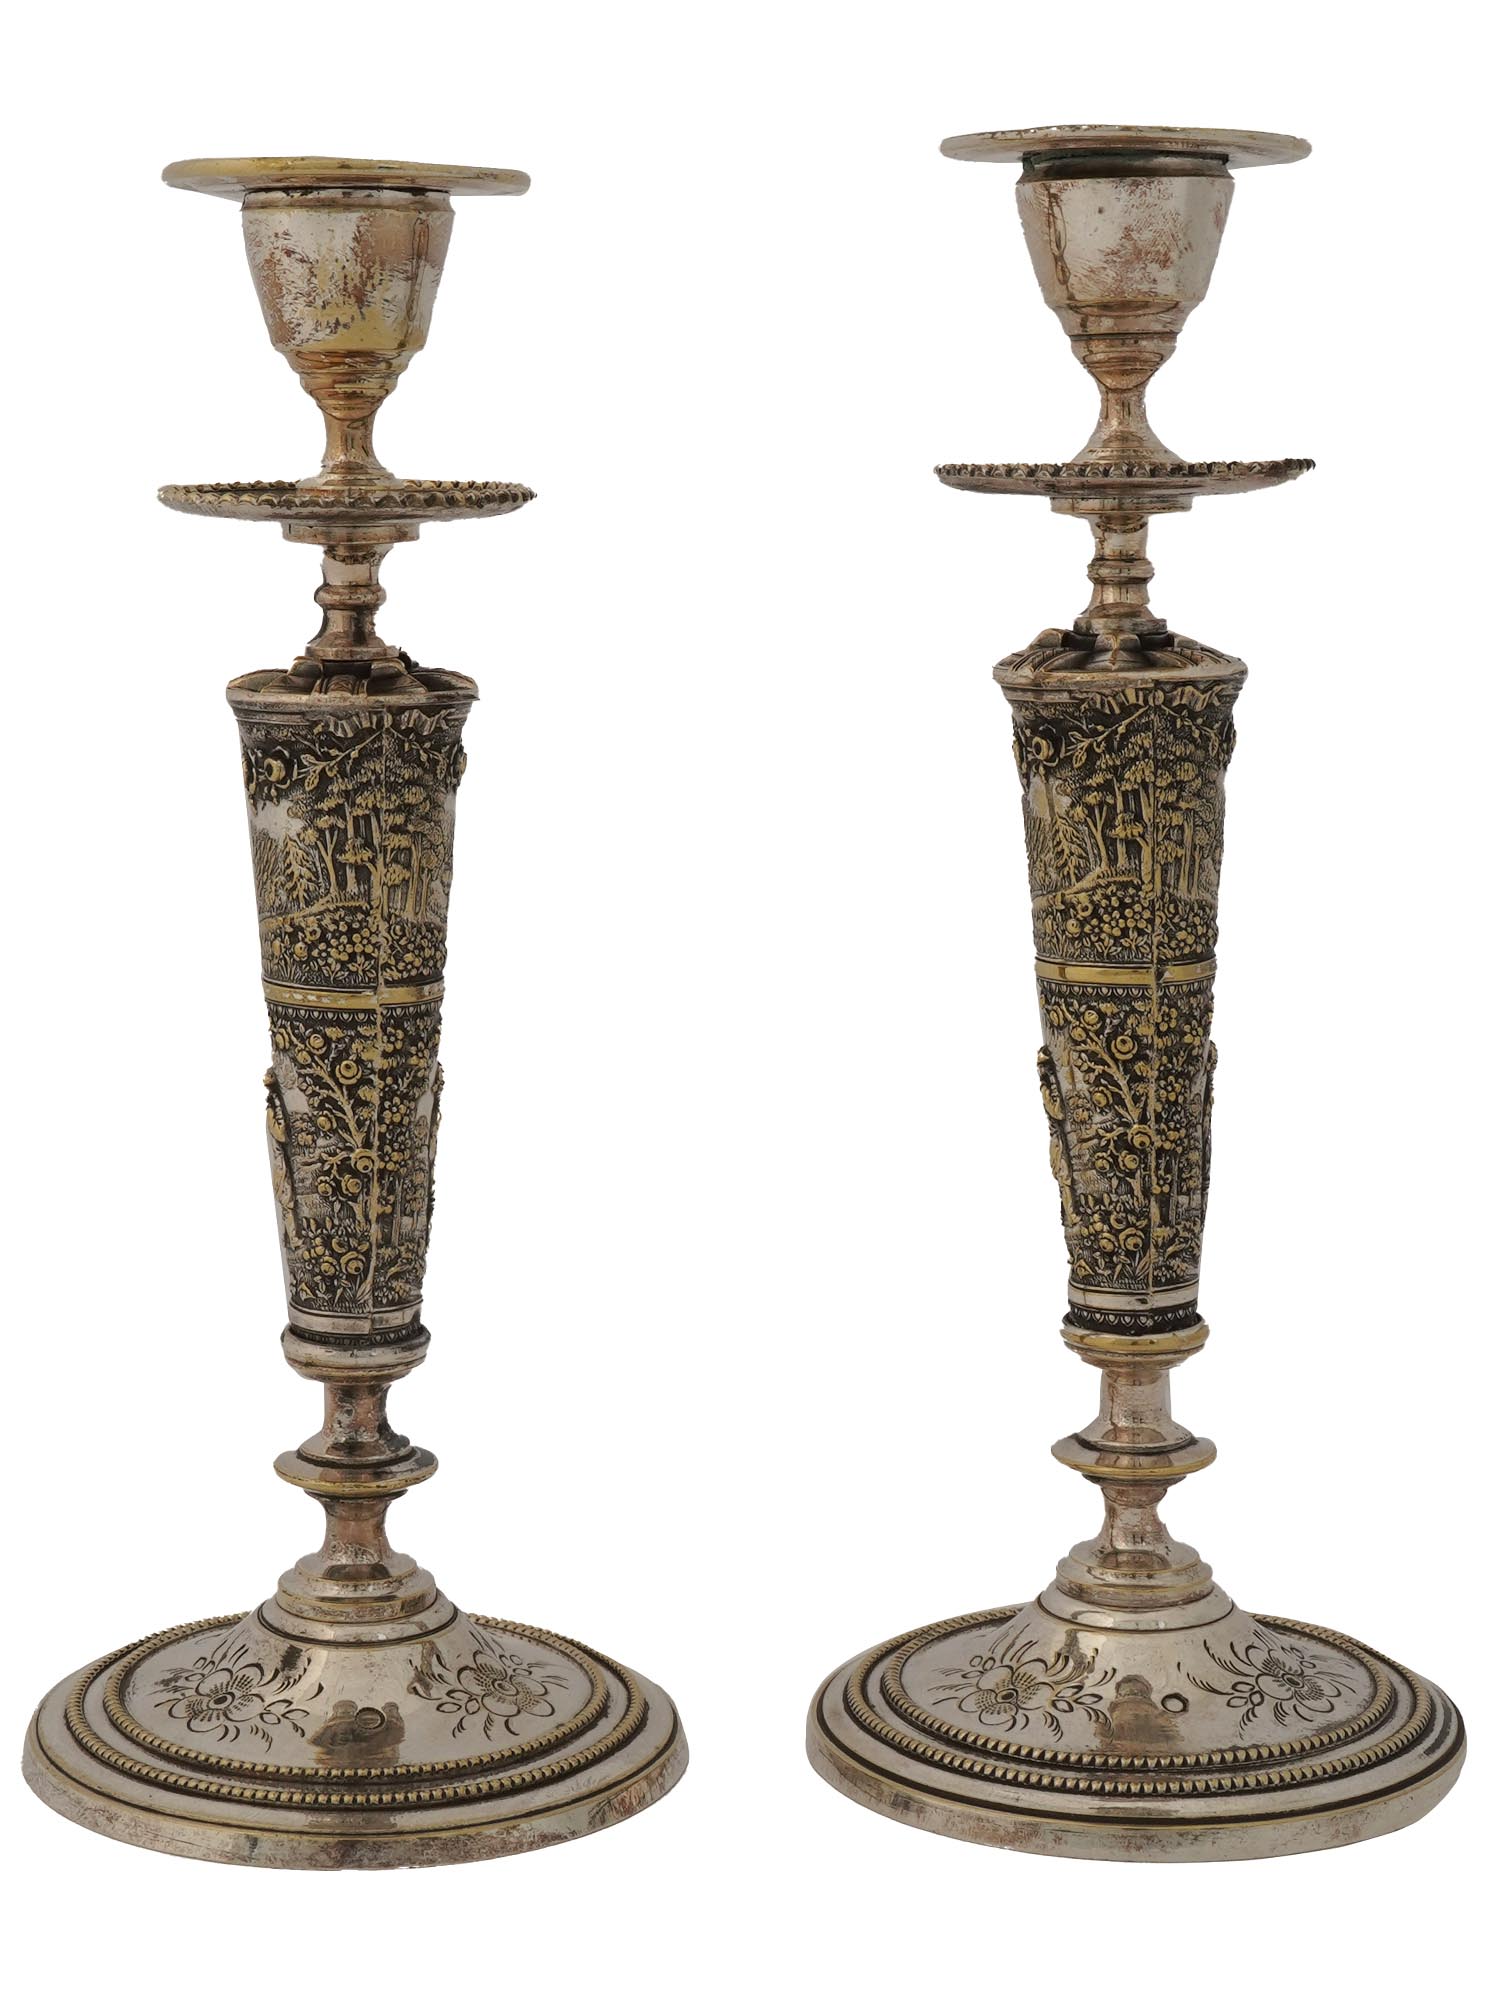 PAIR OF RUSSIAN ENGRAVED SILVER CANDLE STICKS PIC-0